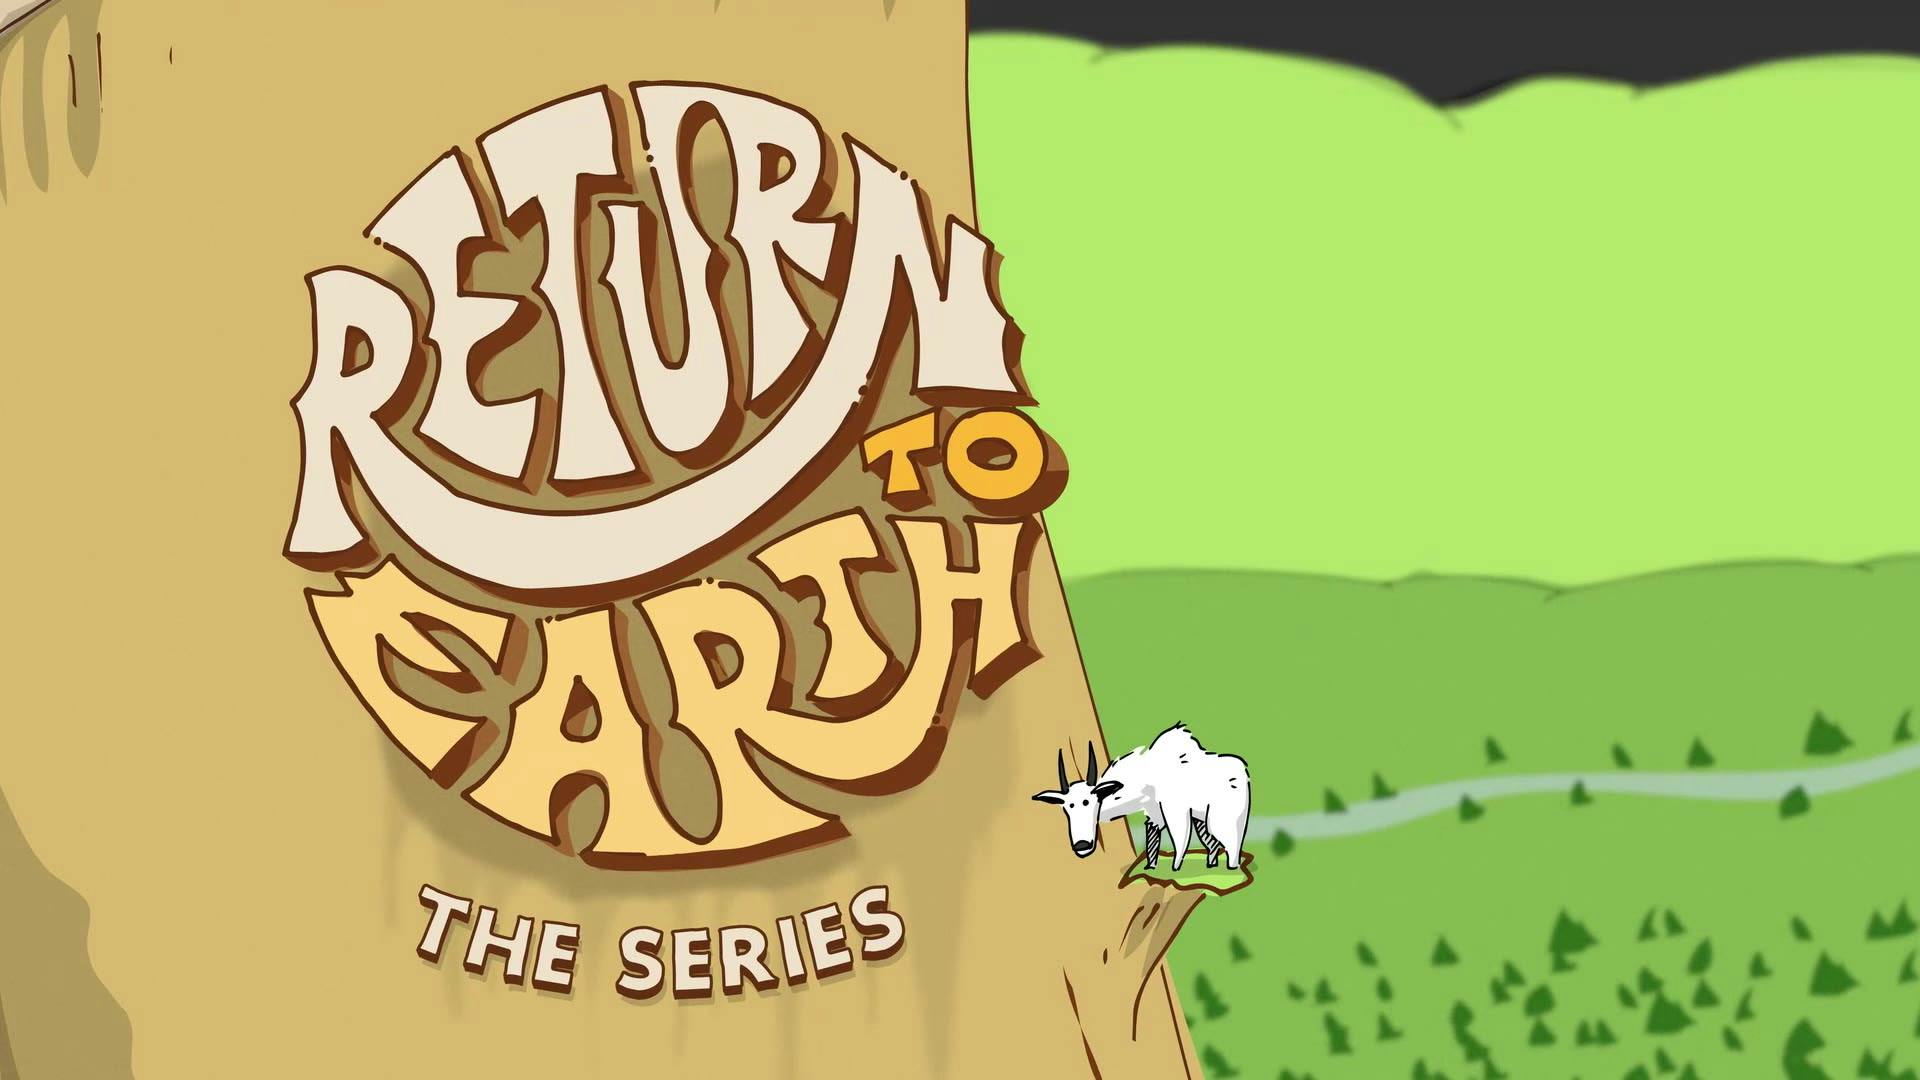 Return to Earth 'The Series' | Trailer